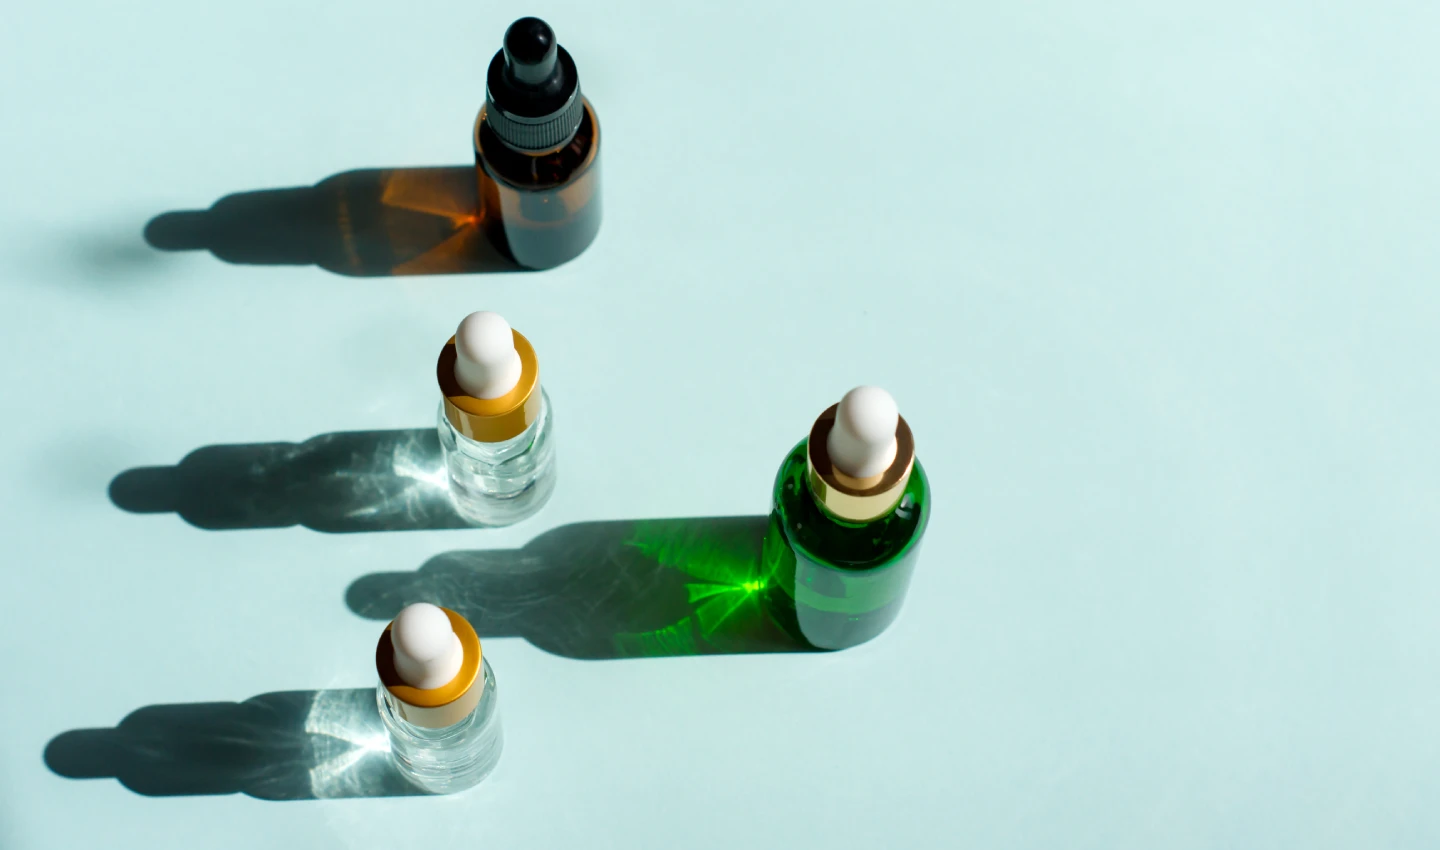 mage of different types of facial oils compared to serums with natural ingredients for deep hydration and high concentrations of active ingredients for specific skincare concerns.